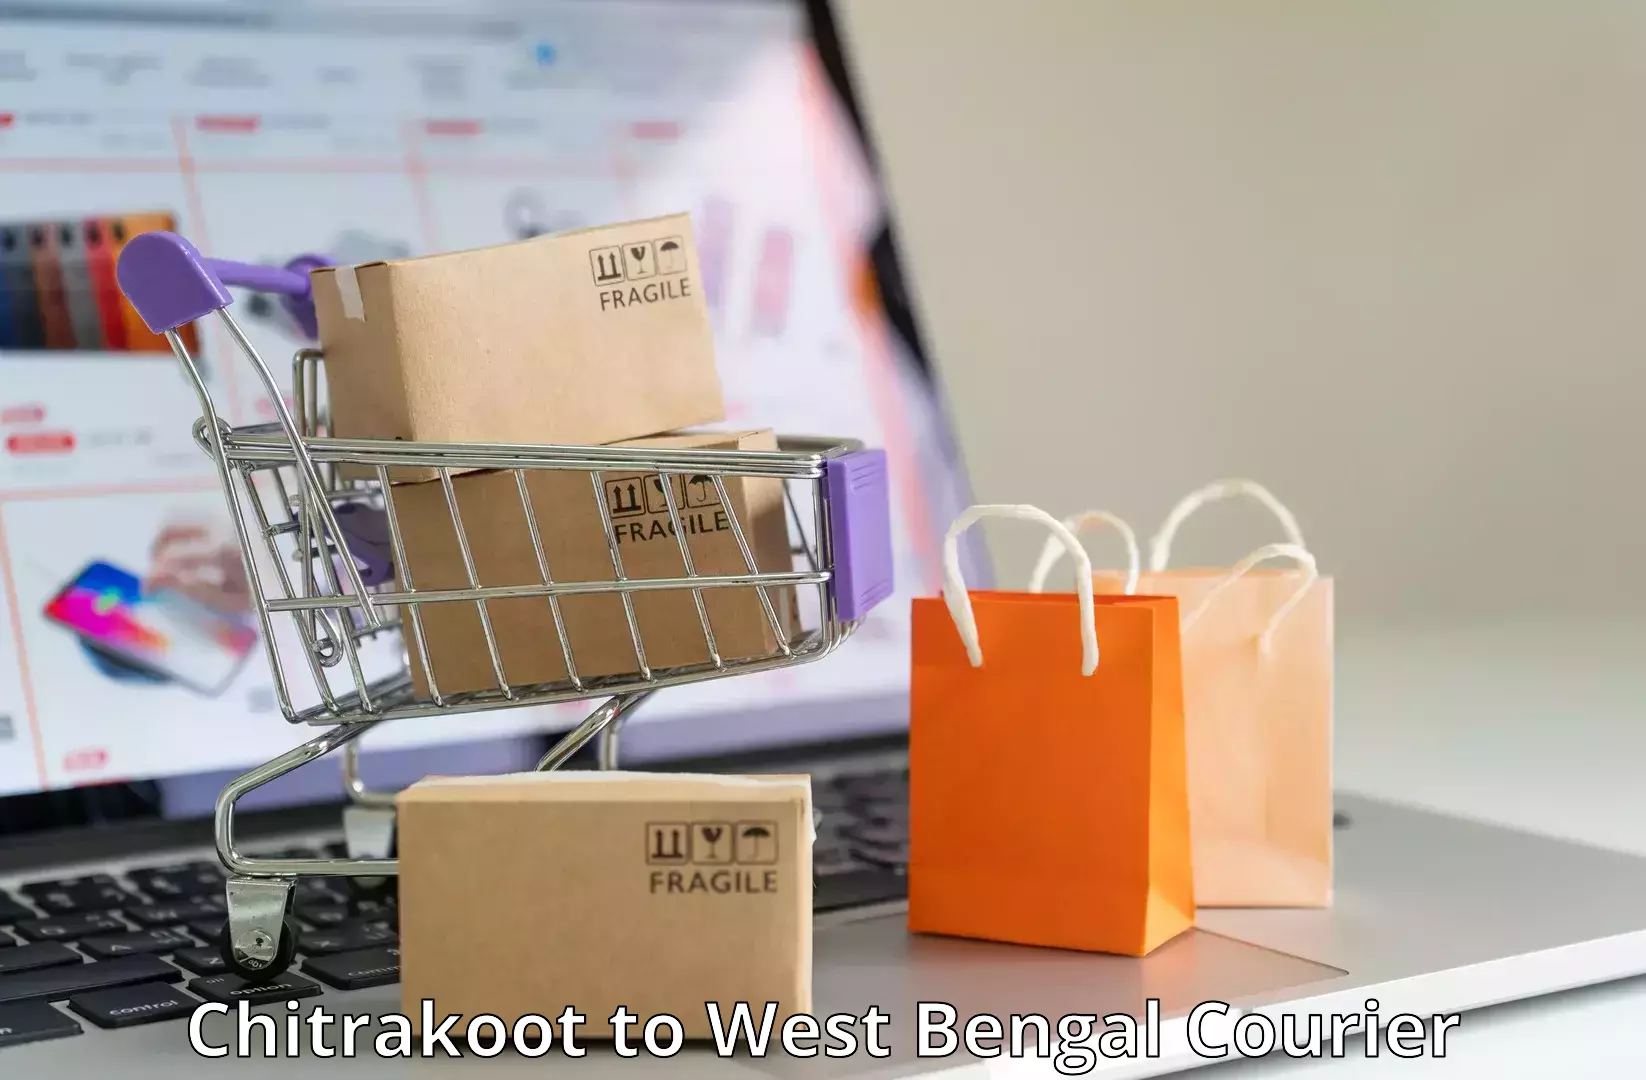 Bulk courier orders Chitrakoot to West Bengal